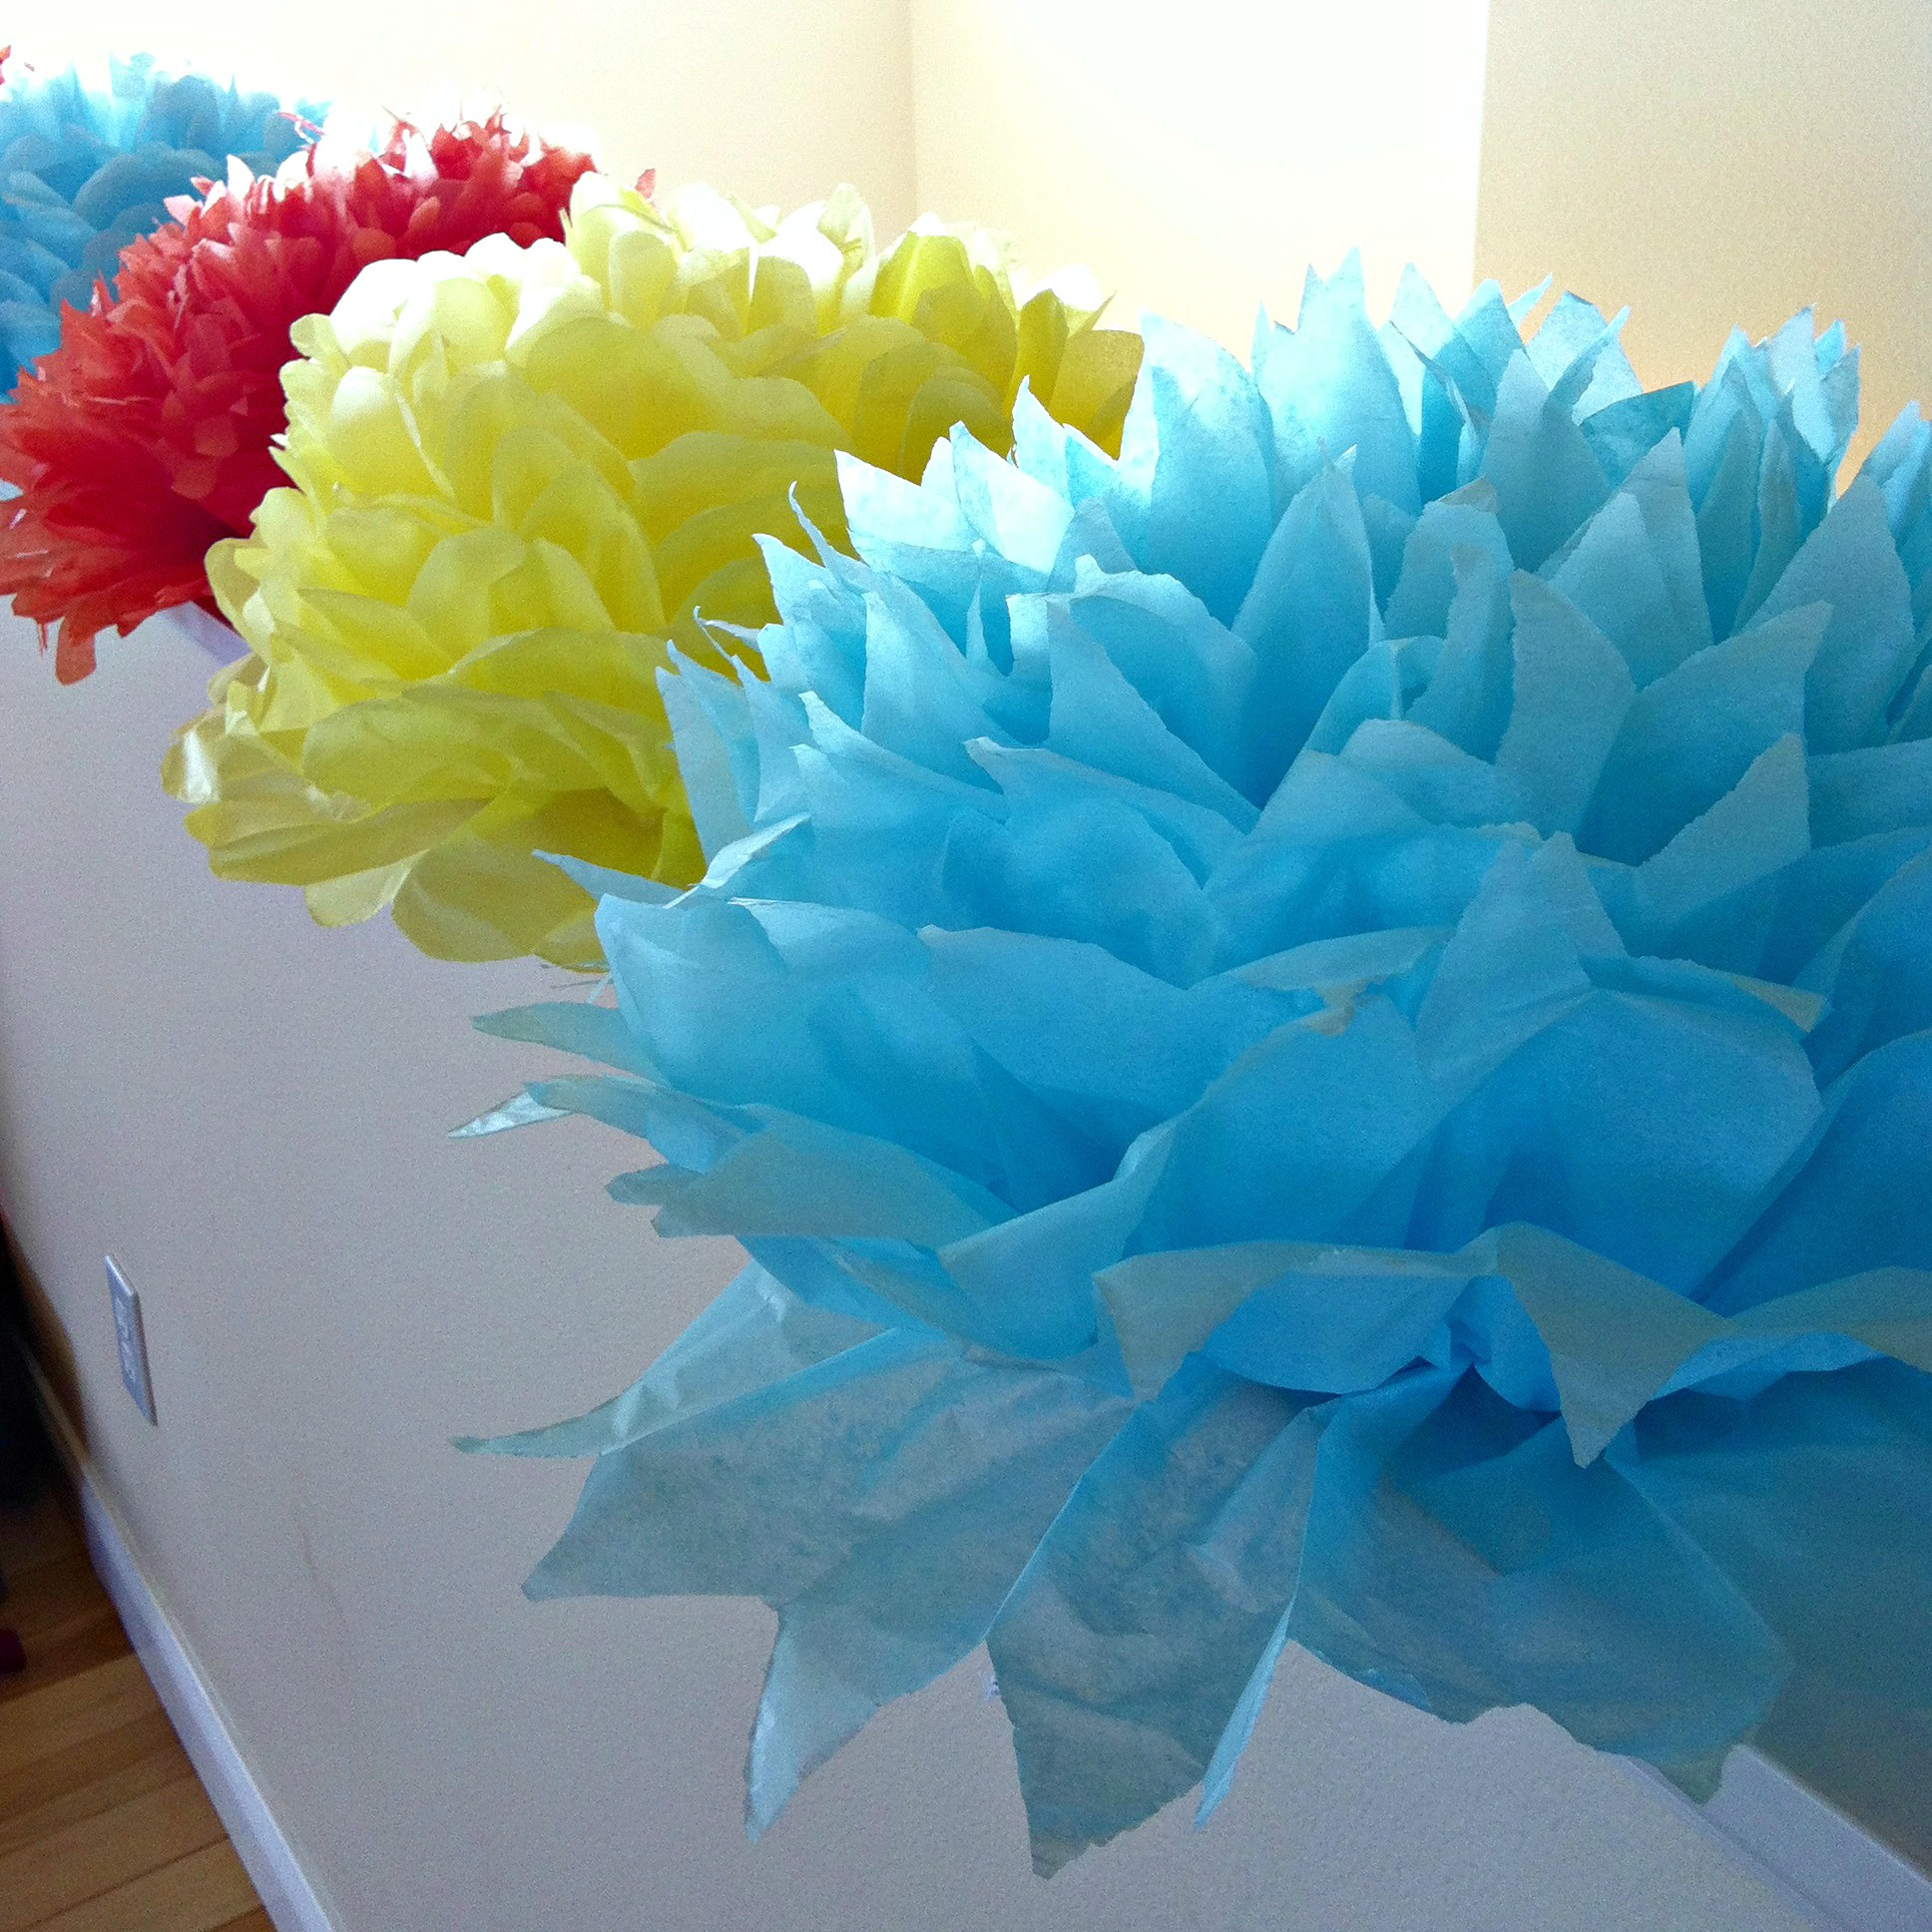 DIY Paper Party Decorations
 Tutorial How To Make DIY Giant Tissue Paper Flowers Sew